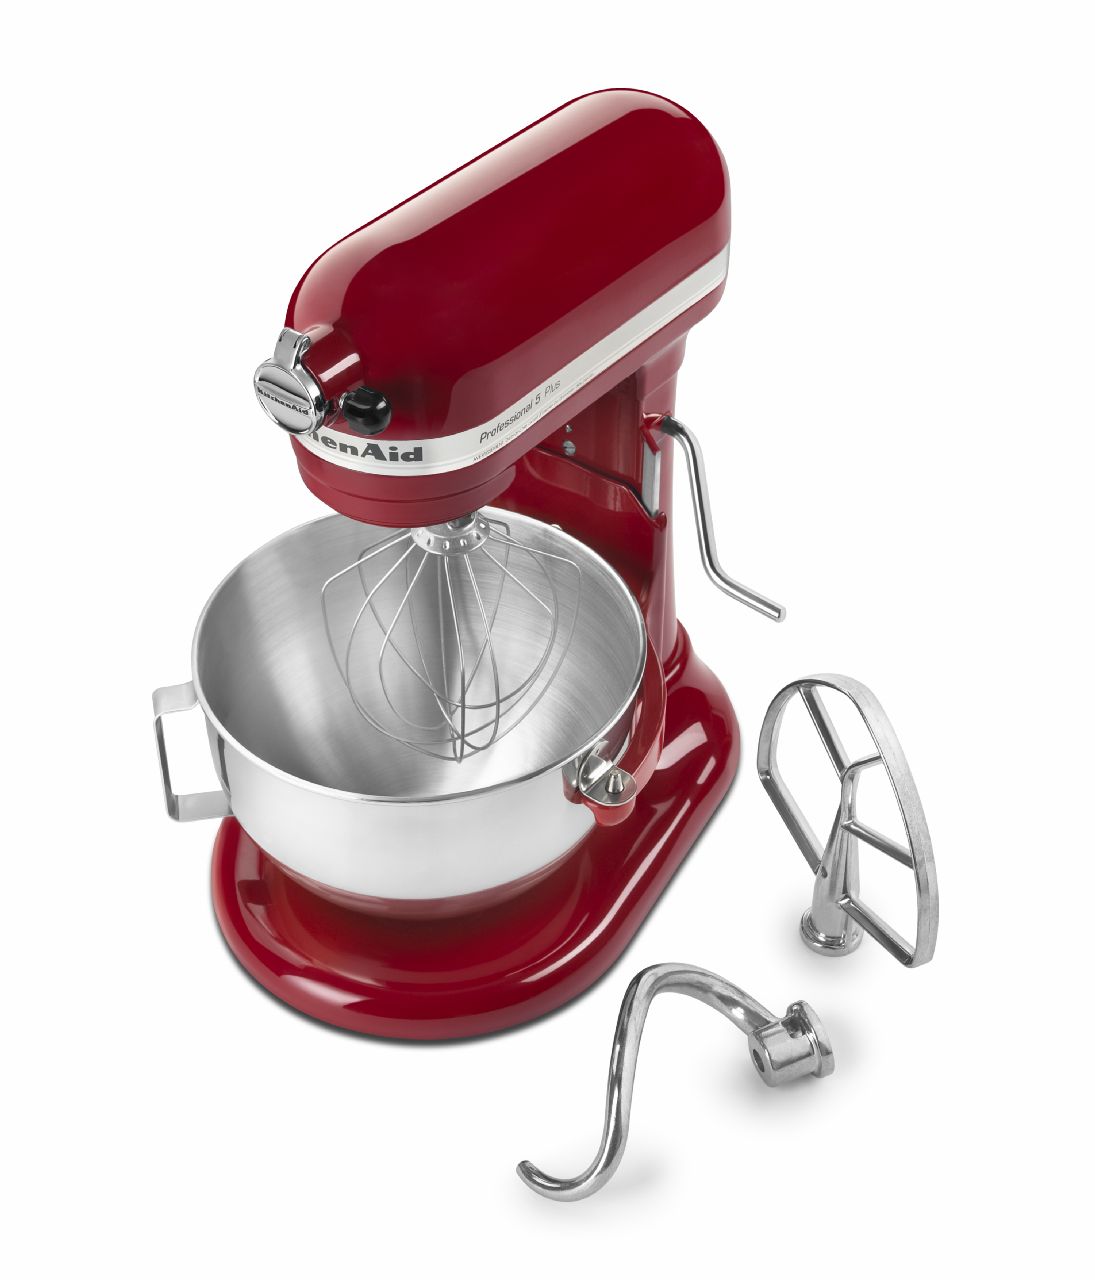 KitchenAid Professional 5 Plus Series 5 Qt. Stand Mixer - Empire Red - image 3 of 5